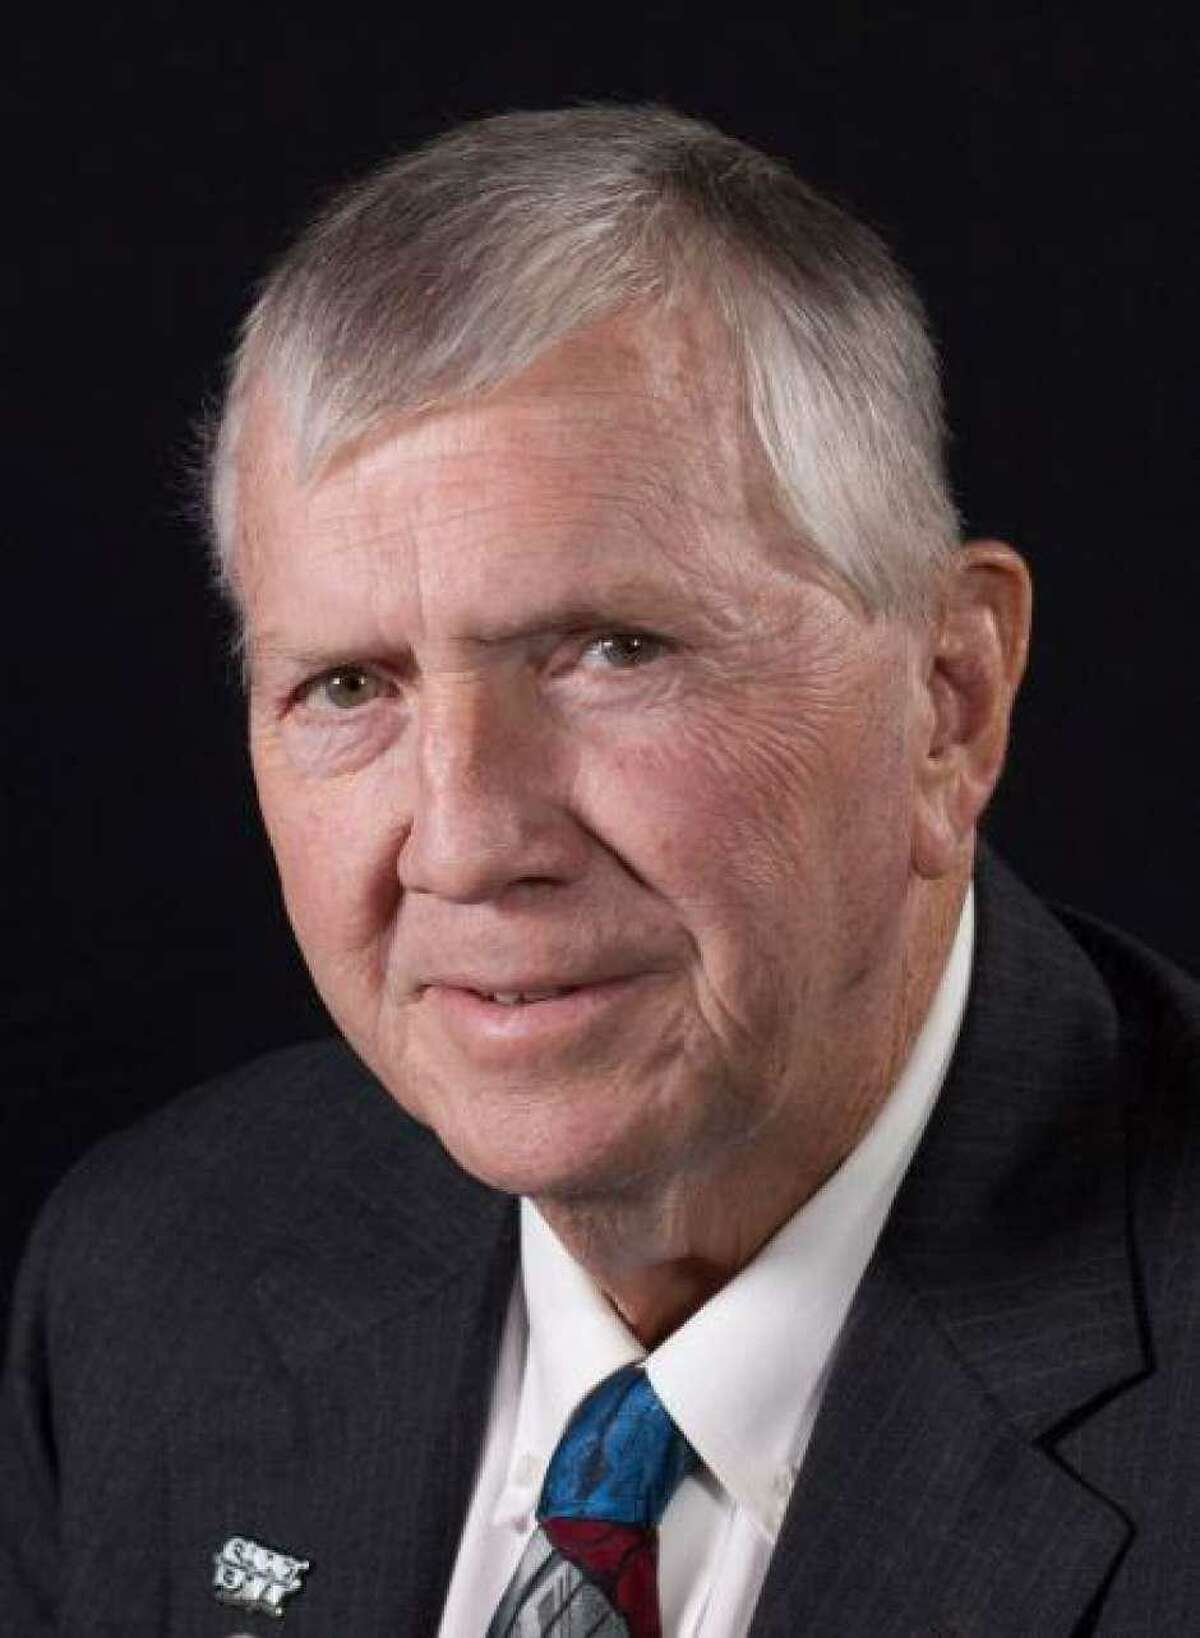 Mike Frazier served on the Southwest ISD board for 40 years but lost a reelection bid Tuesday.